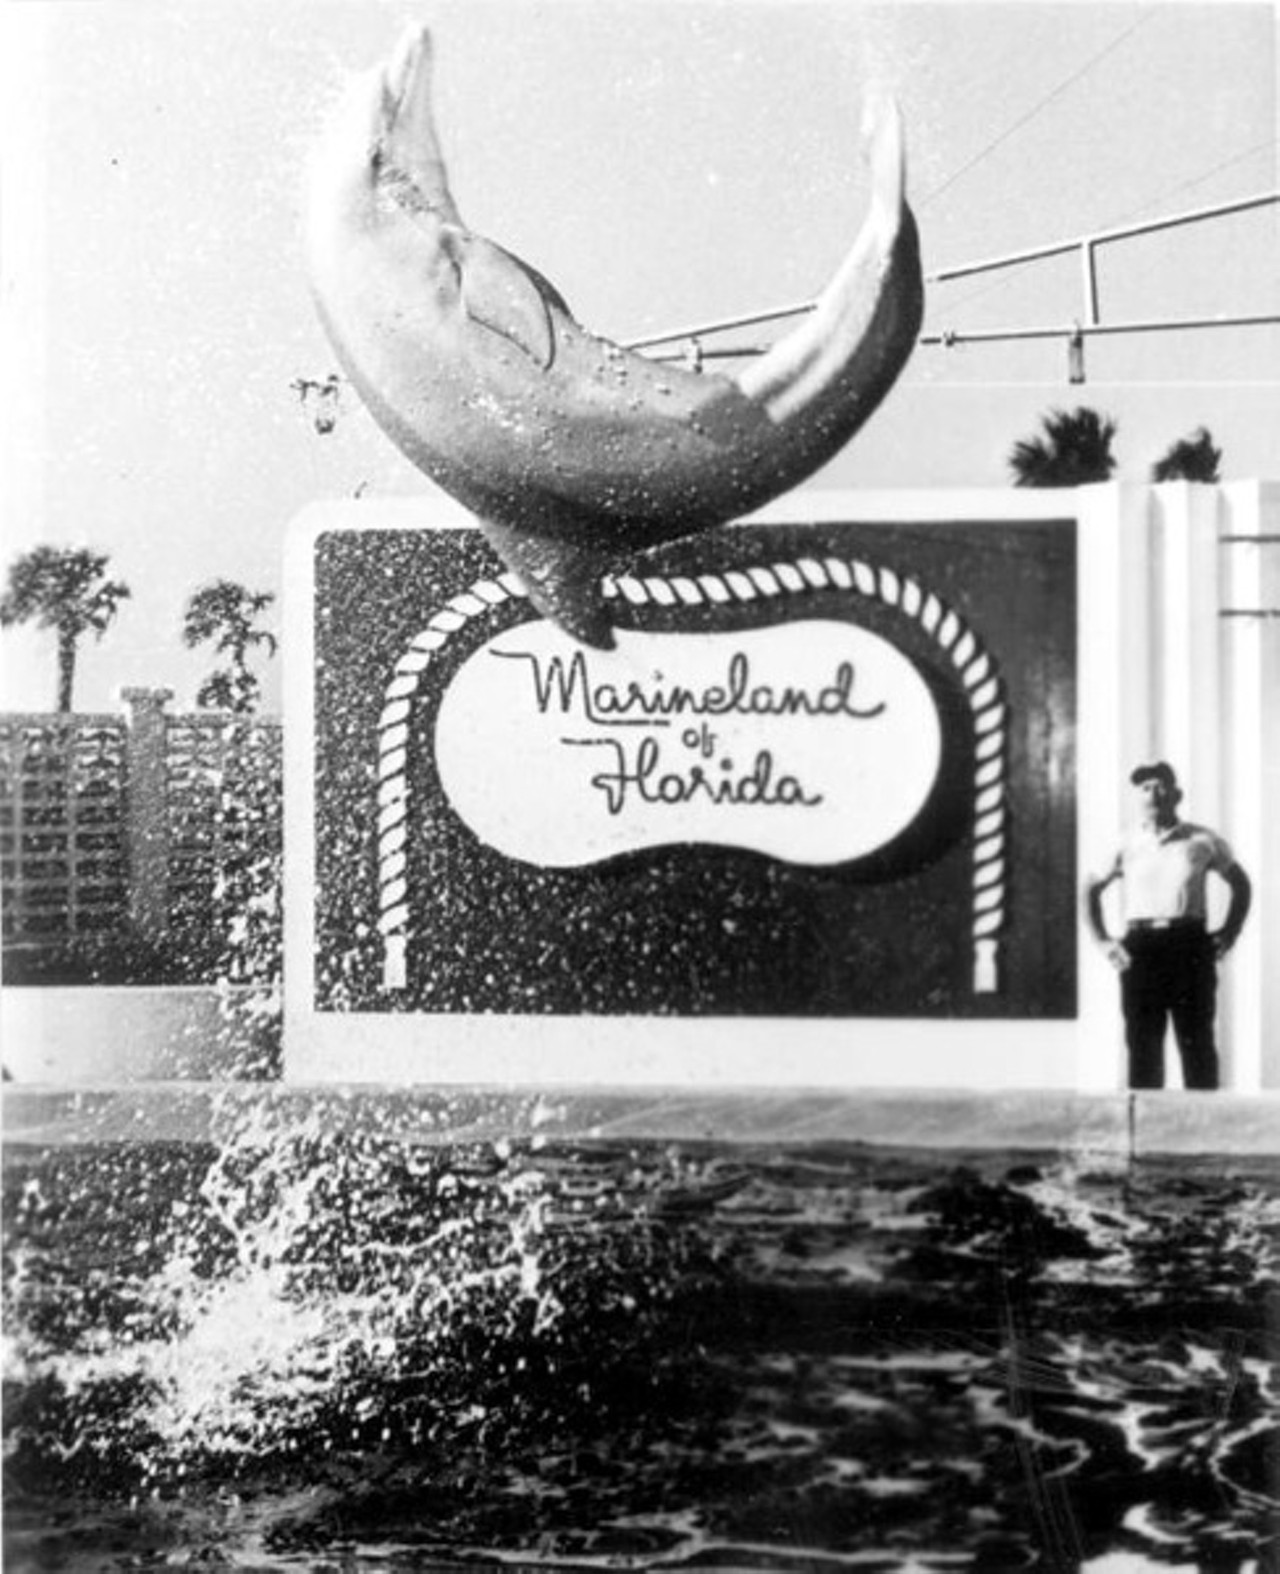 Marineland Florida
Marineland Florida was kind of like a low-rent Sea World, located about 20 miles south of St. Augustine. The park was opened to the publis in 1938 and was originally called Marine Stusios, as it was built as an underwater studio for filming marine life.